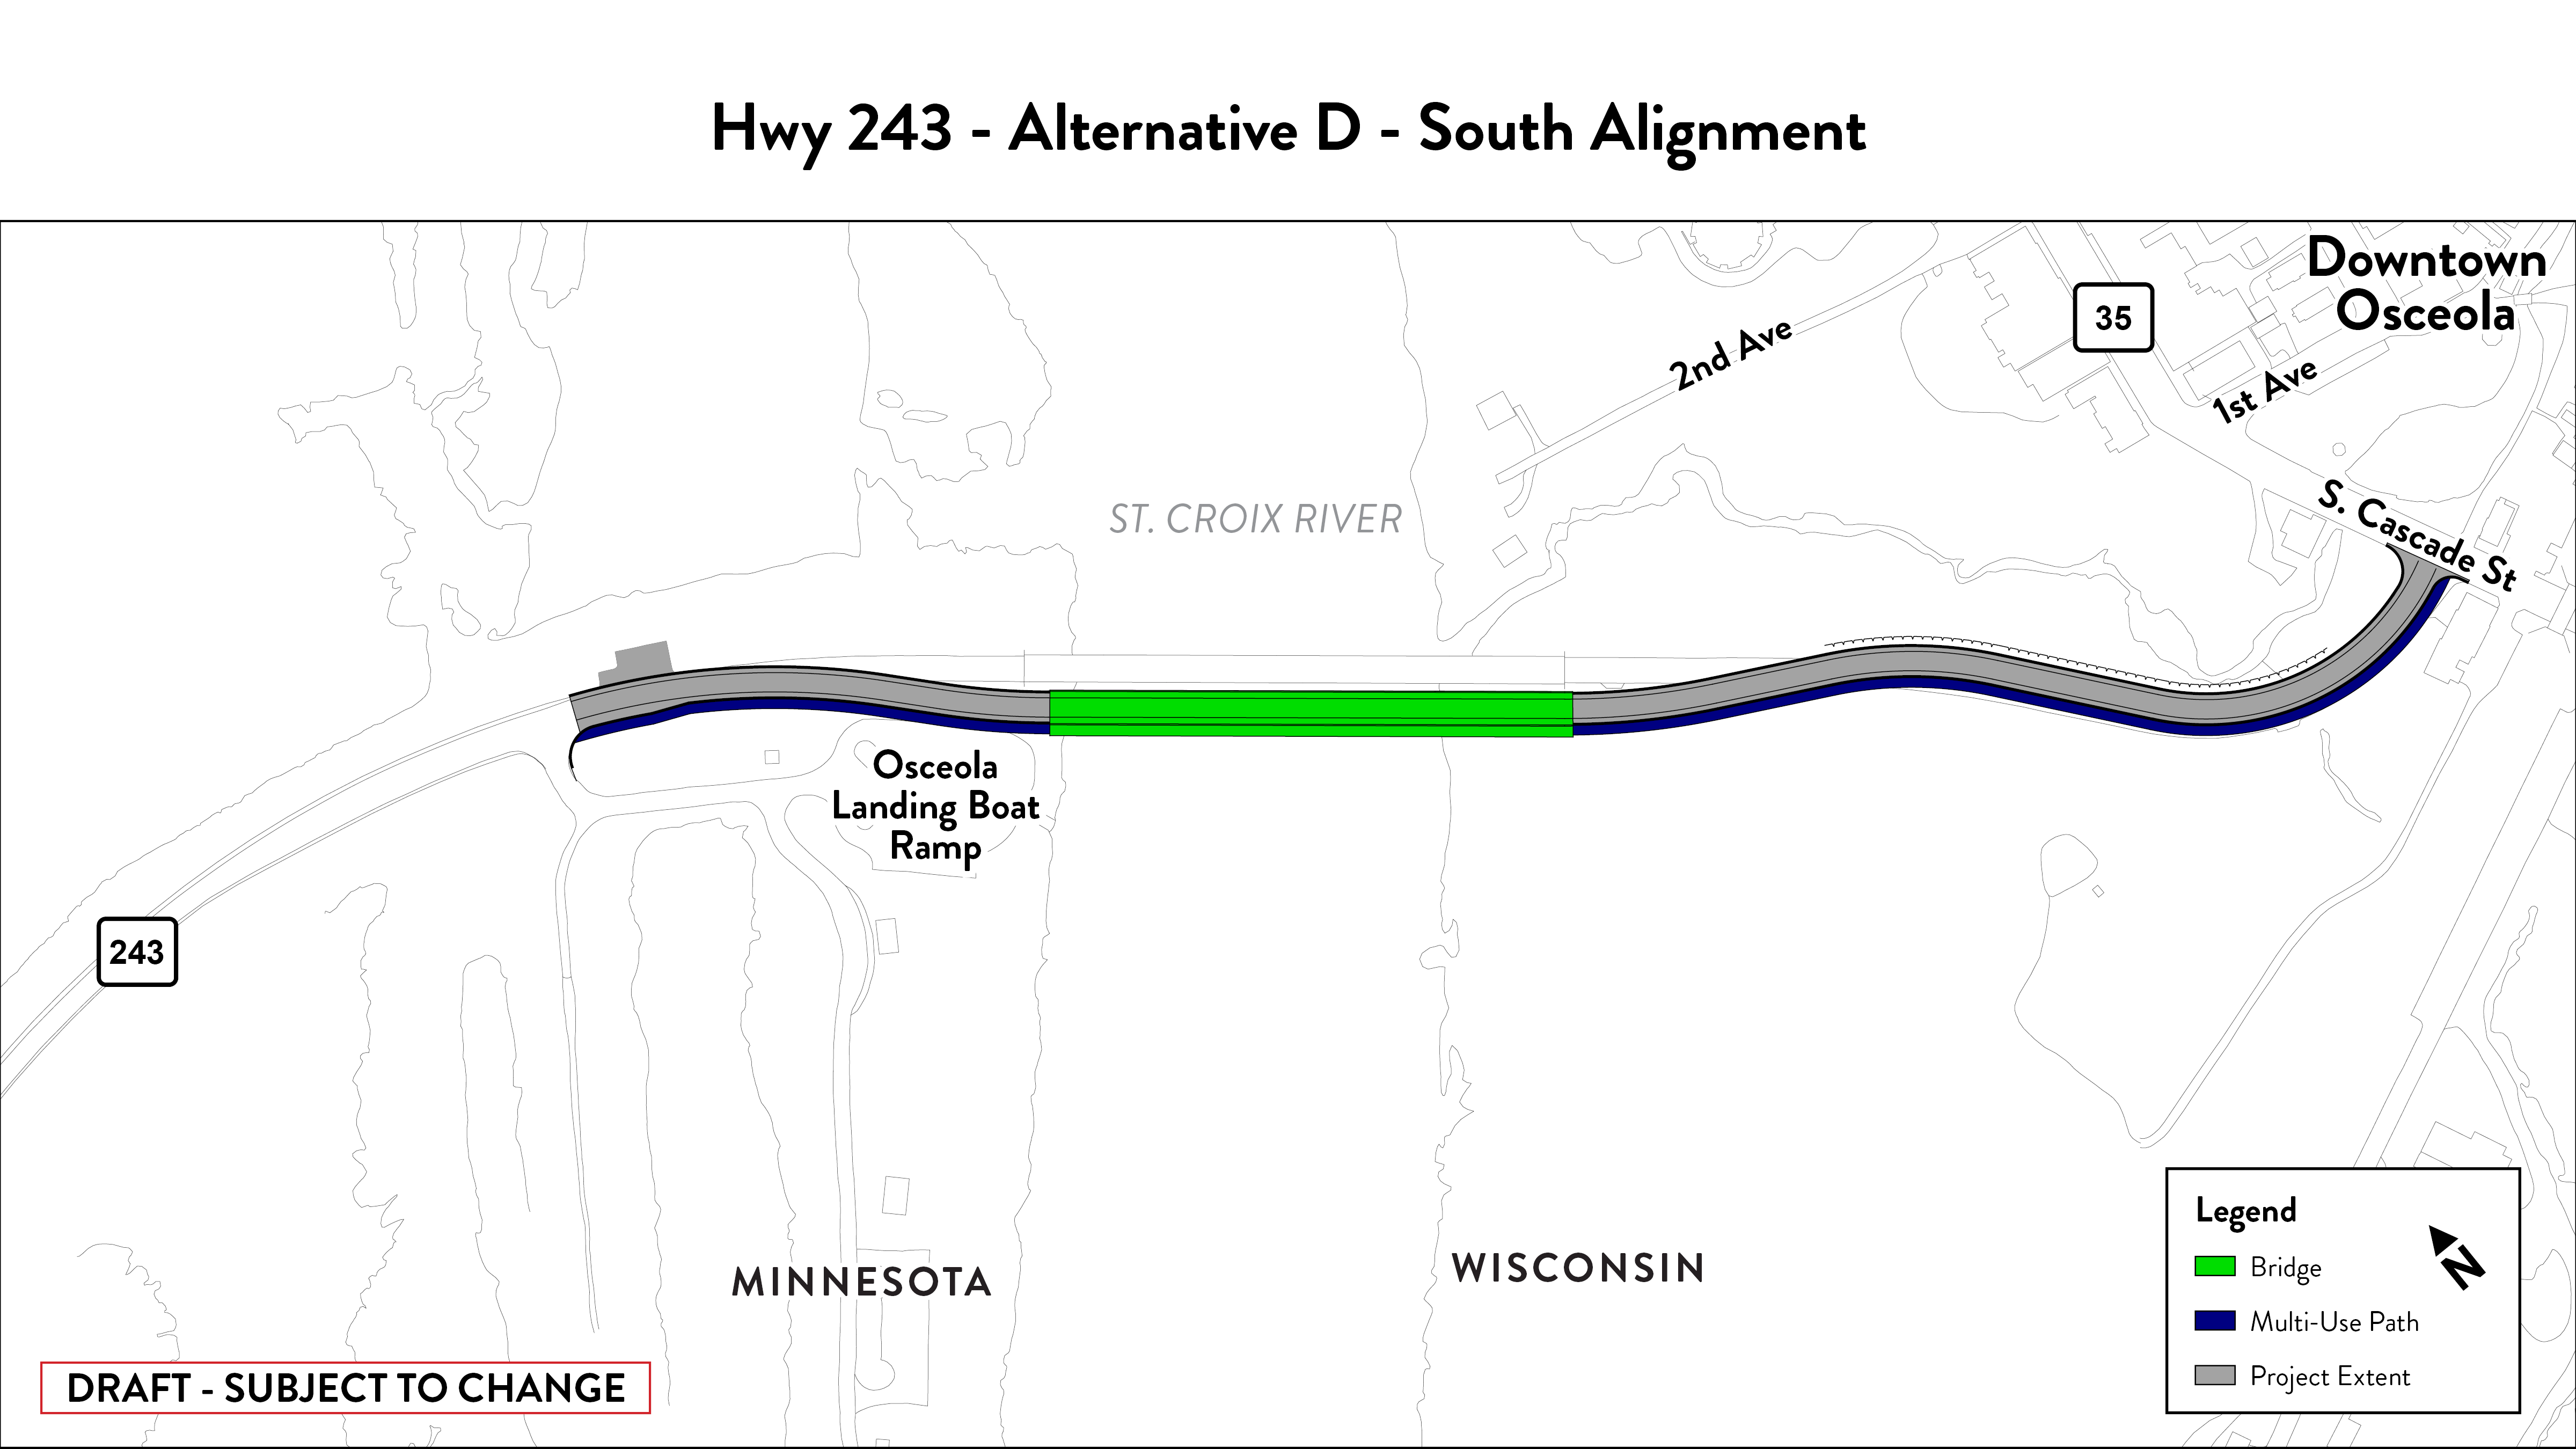 Shows alternative D, including construction limits, proposed and existing road, and path for people walking or biking.